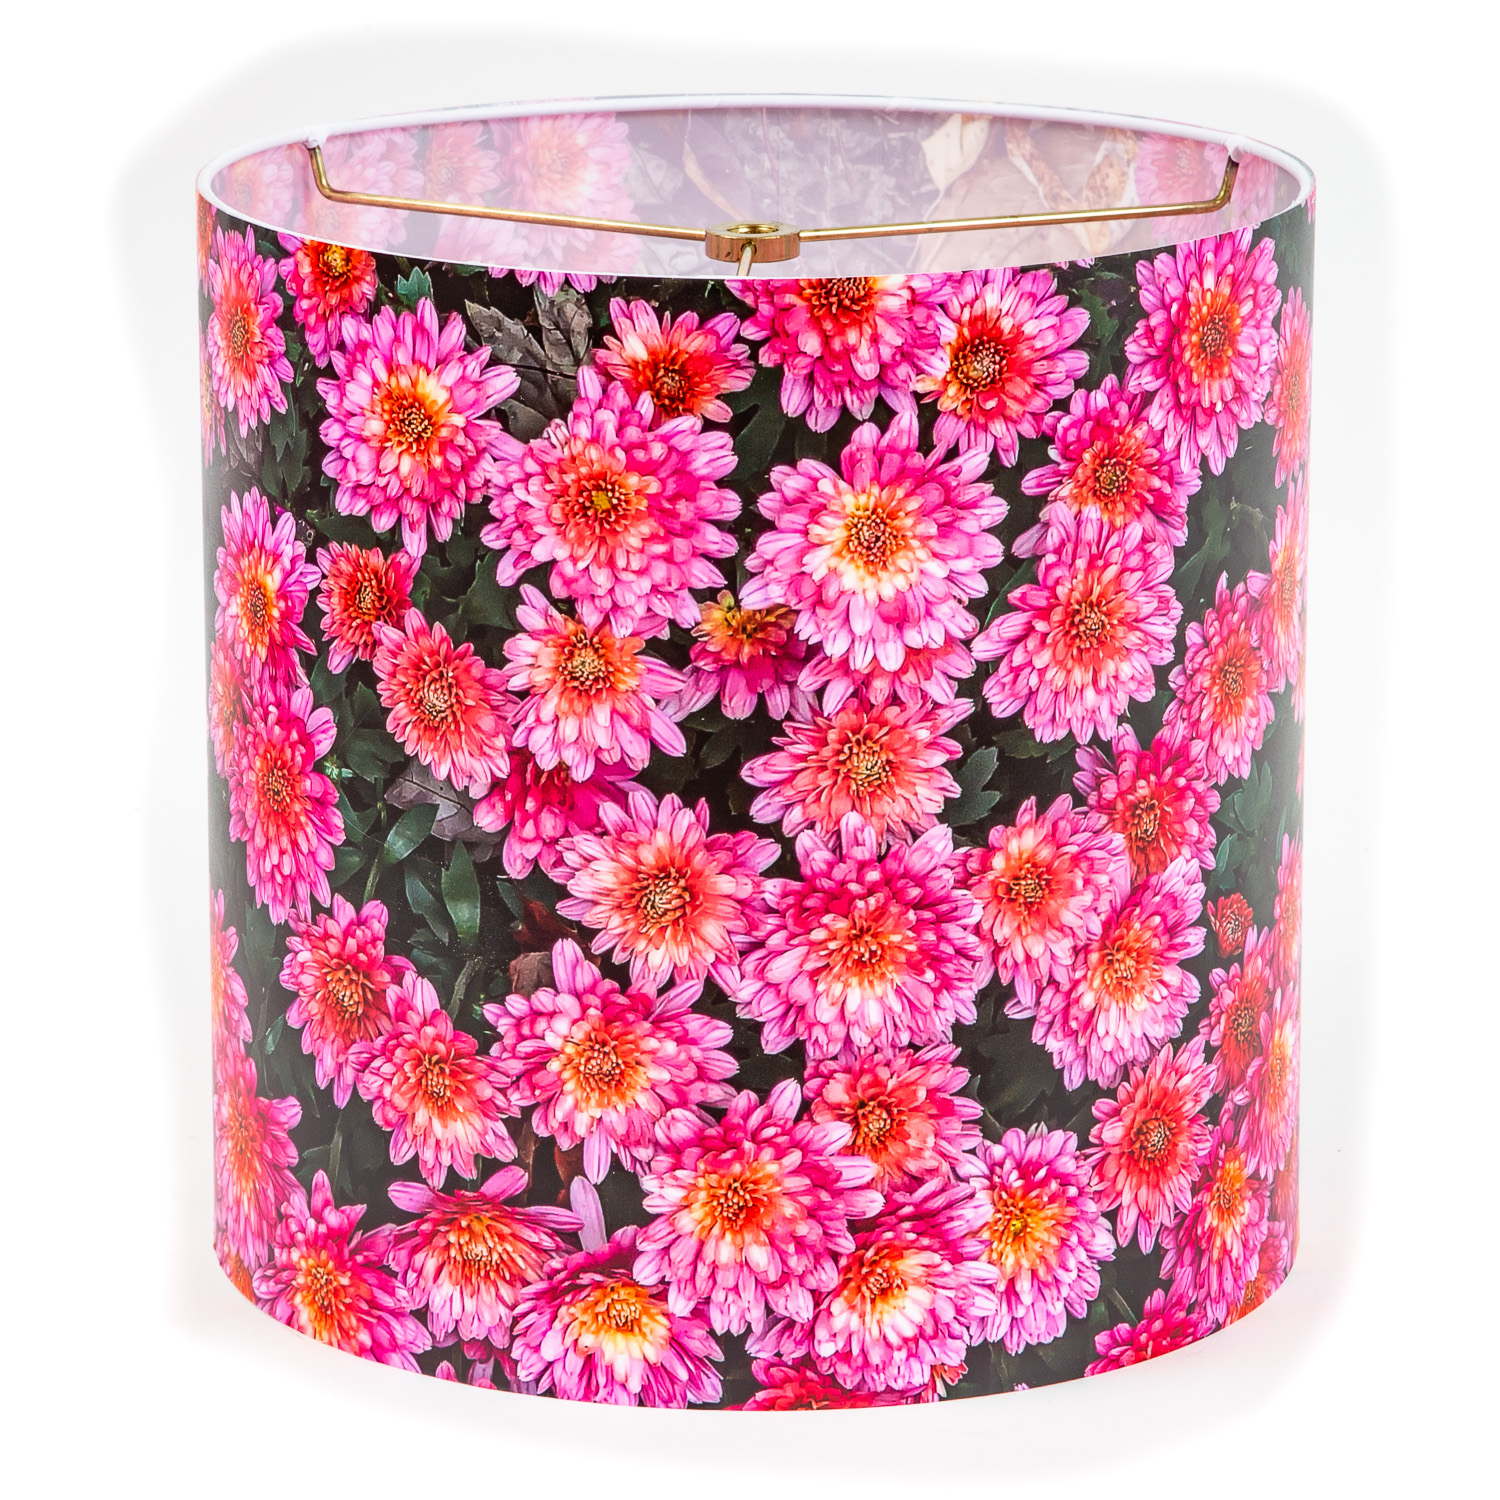 111: Pink Chrysanthemum: Mums are called the 'Queen of Fall Flowers' -- Photo on Lamp shade by David Elmore